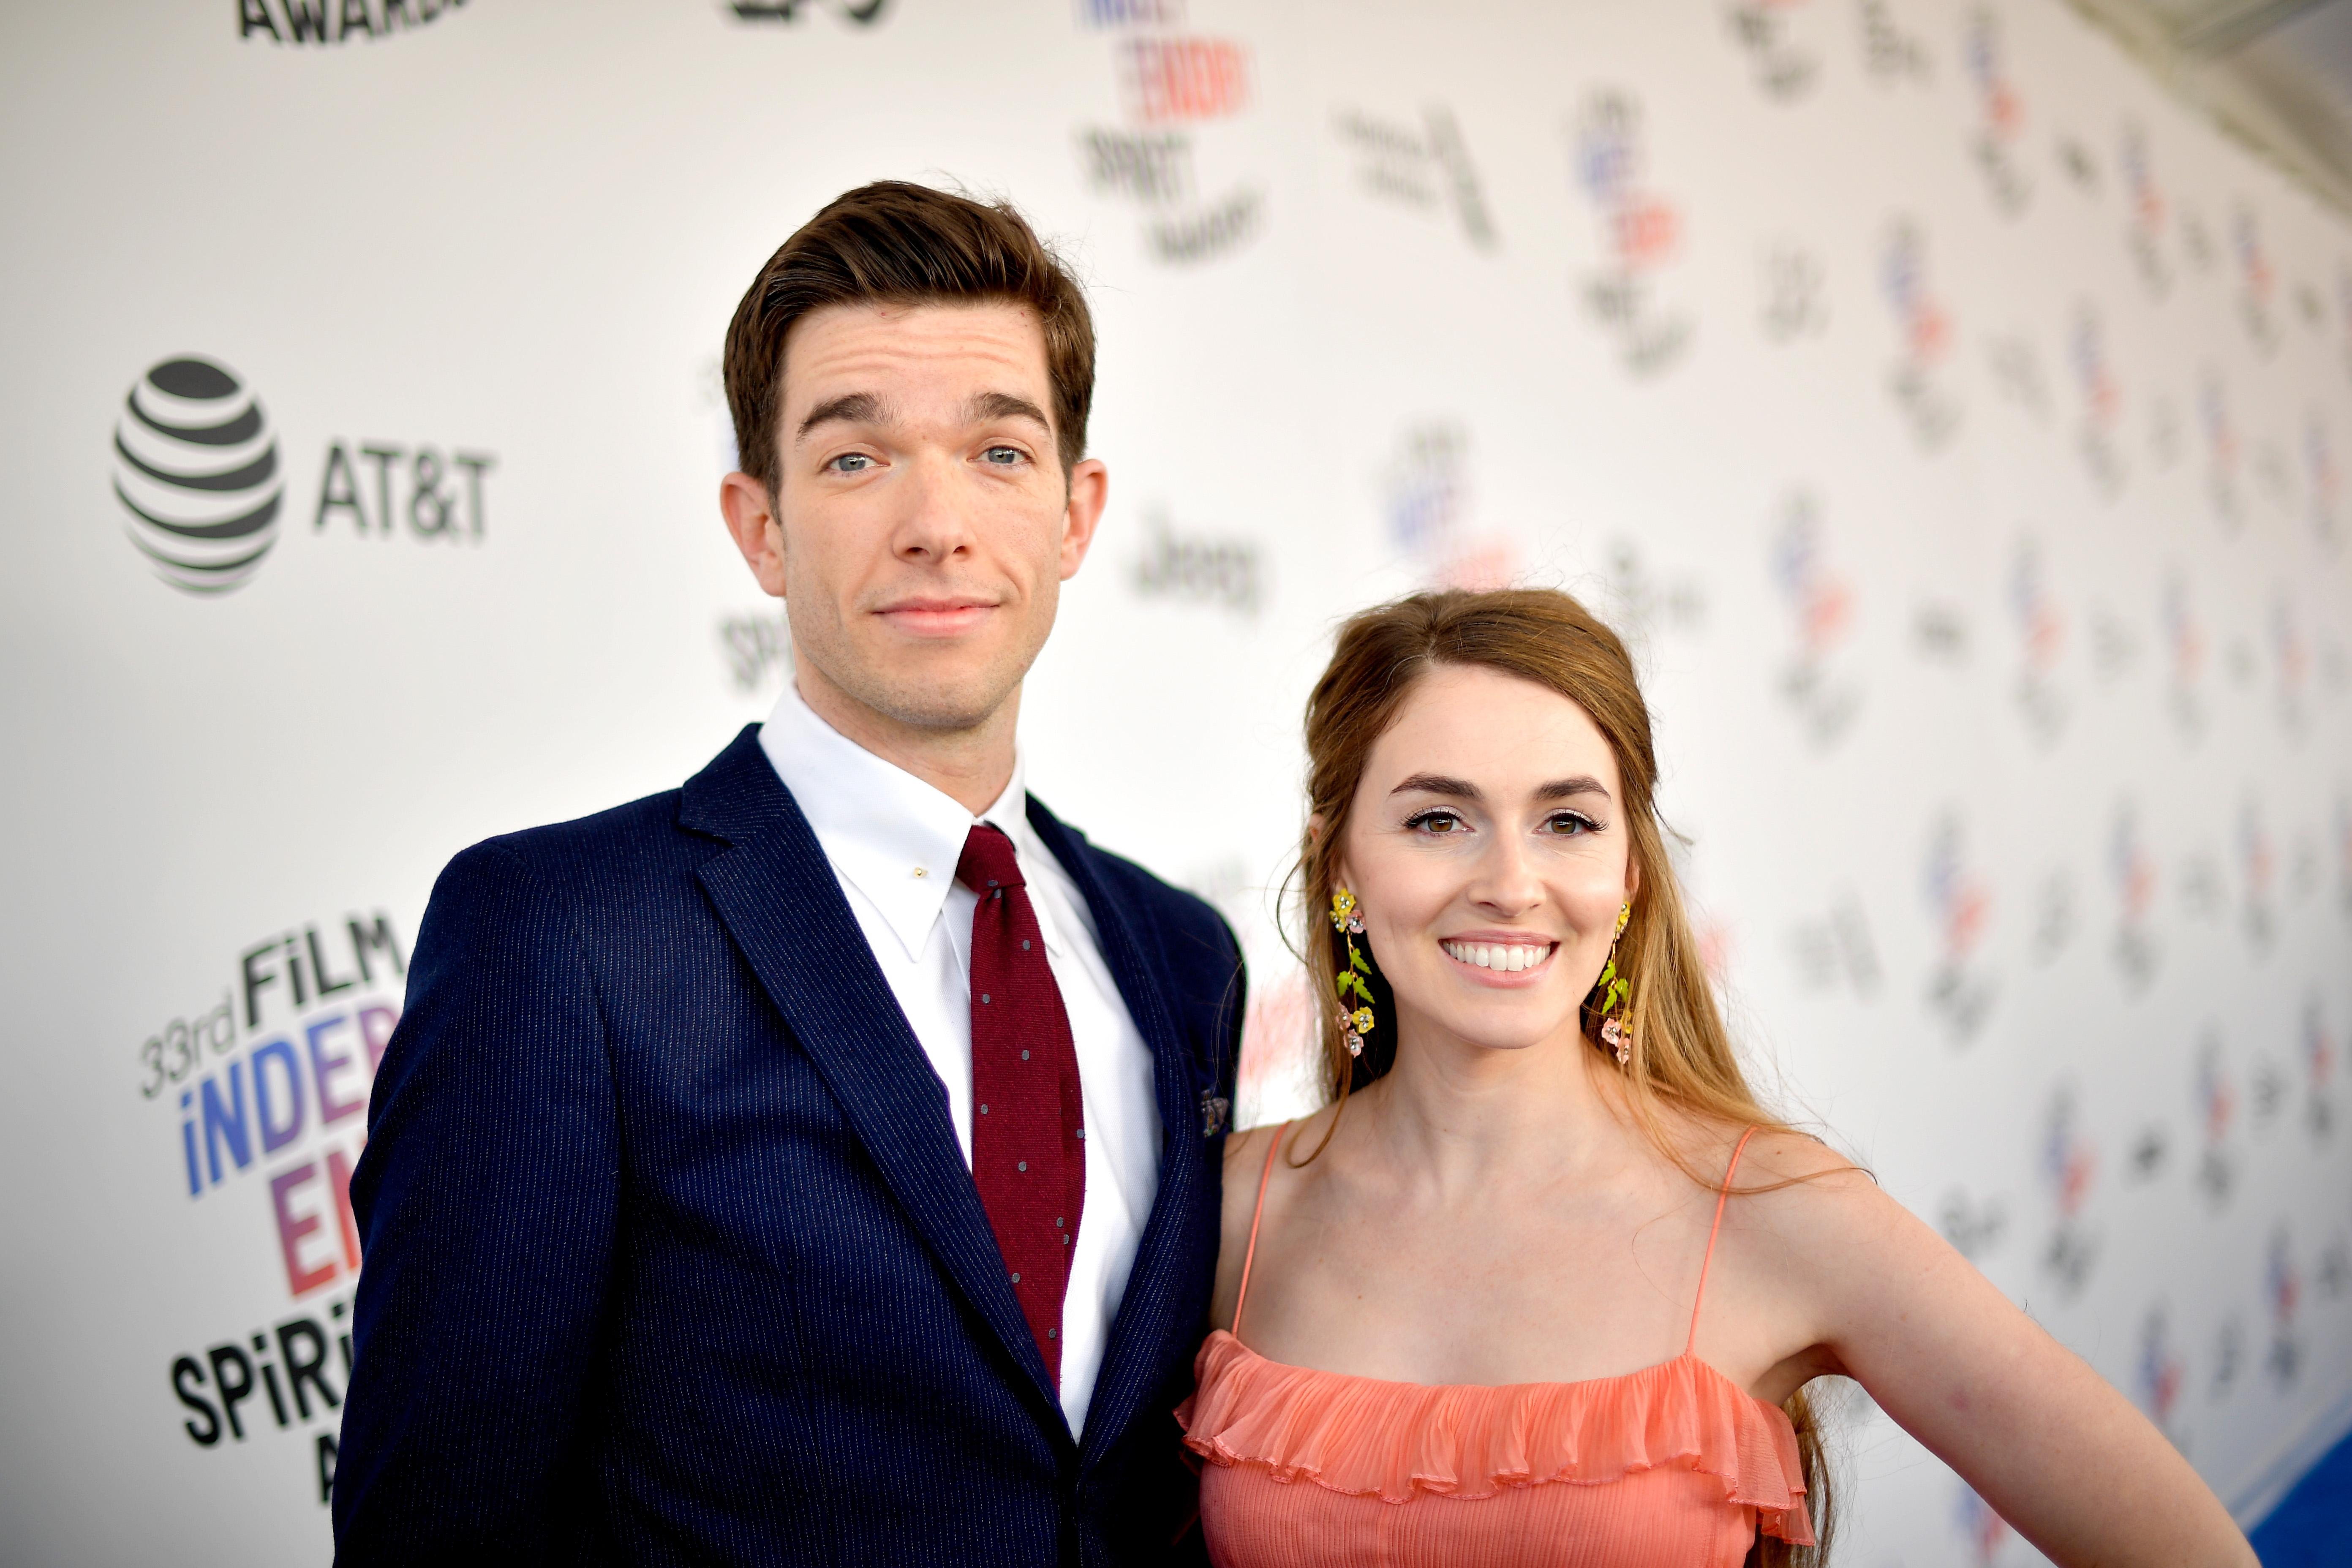 Is John Mulaney Receiving a Divorce? Facts on His Relationship